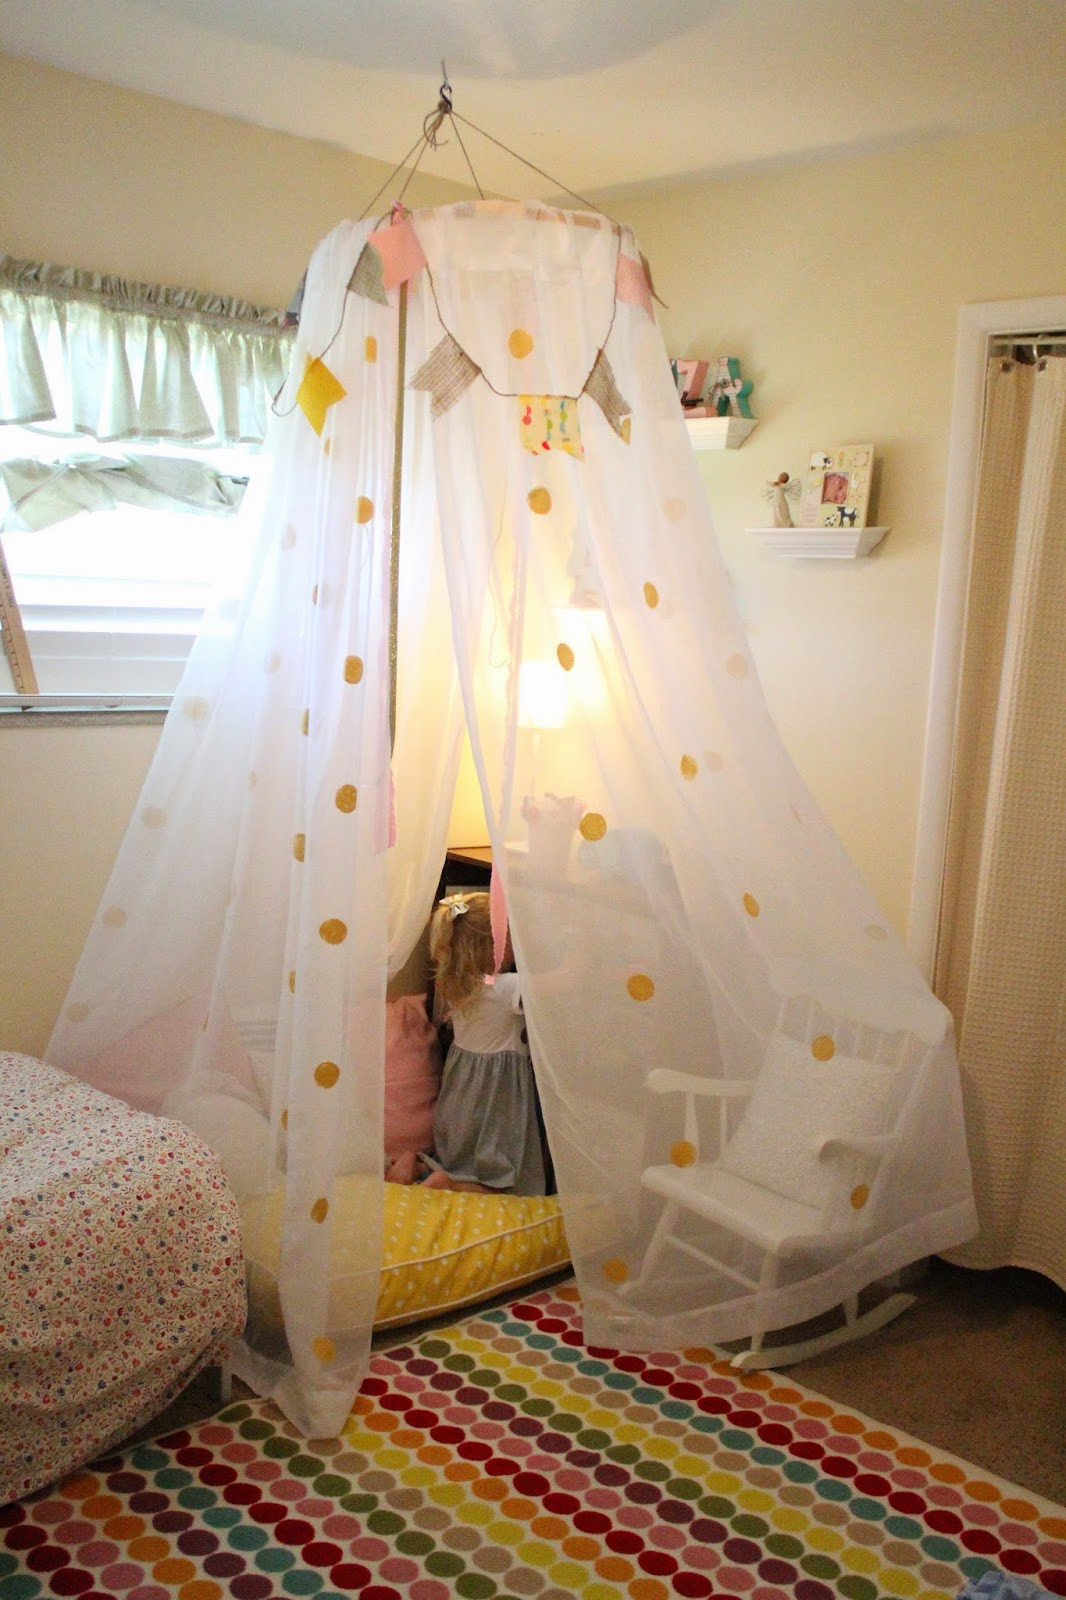 DIY Toddler Bed Tent
 Mommy Vignettes DIY No Sew Tent Canopy Tutorial